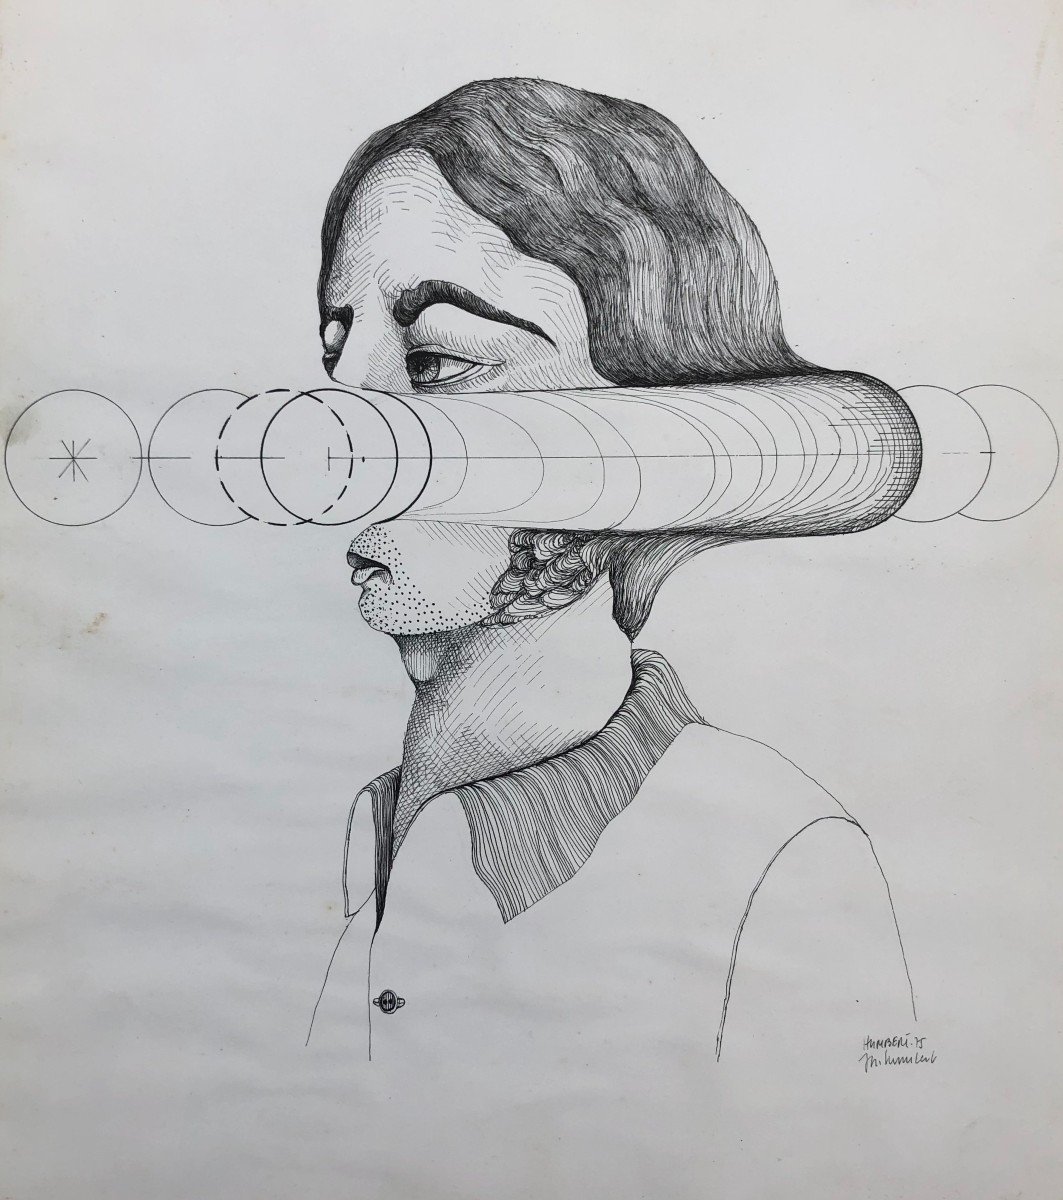 Portrait, Surrealist School, Drawing Signed Humbert And Dated 1975